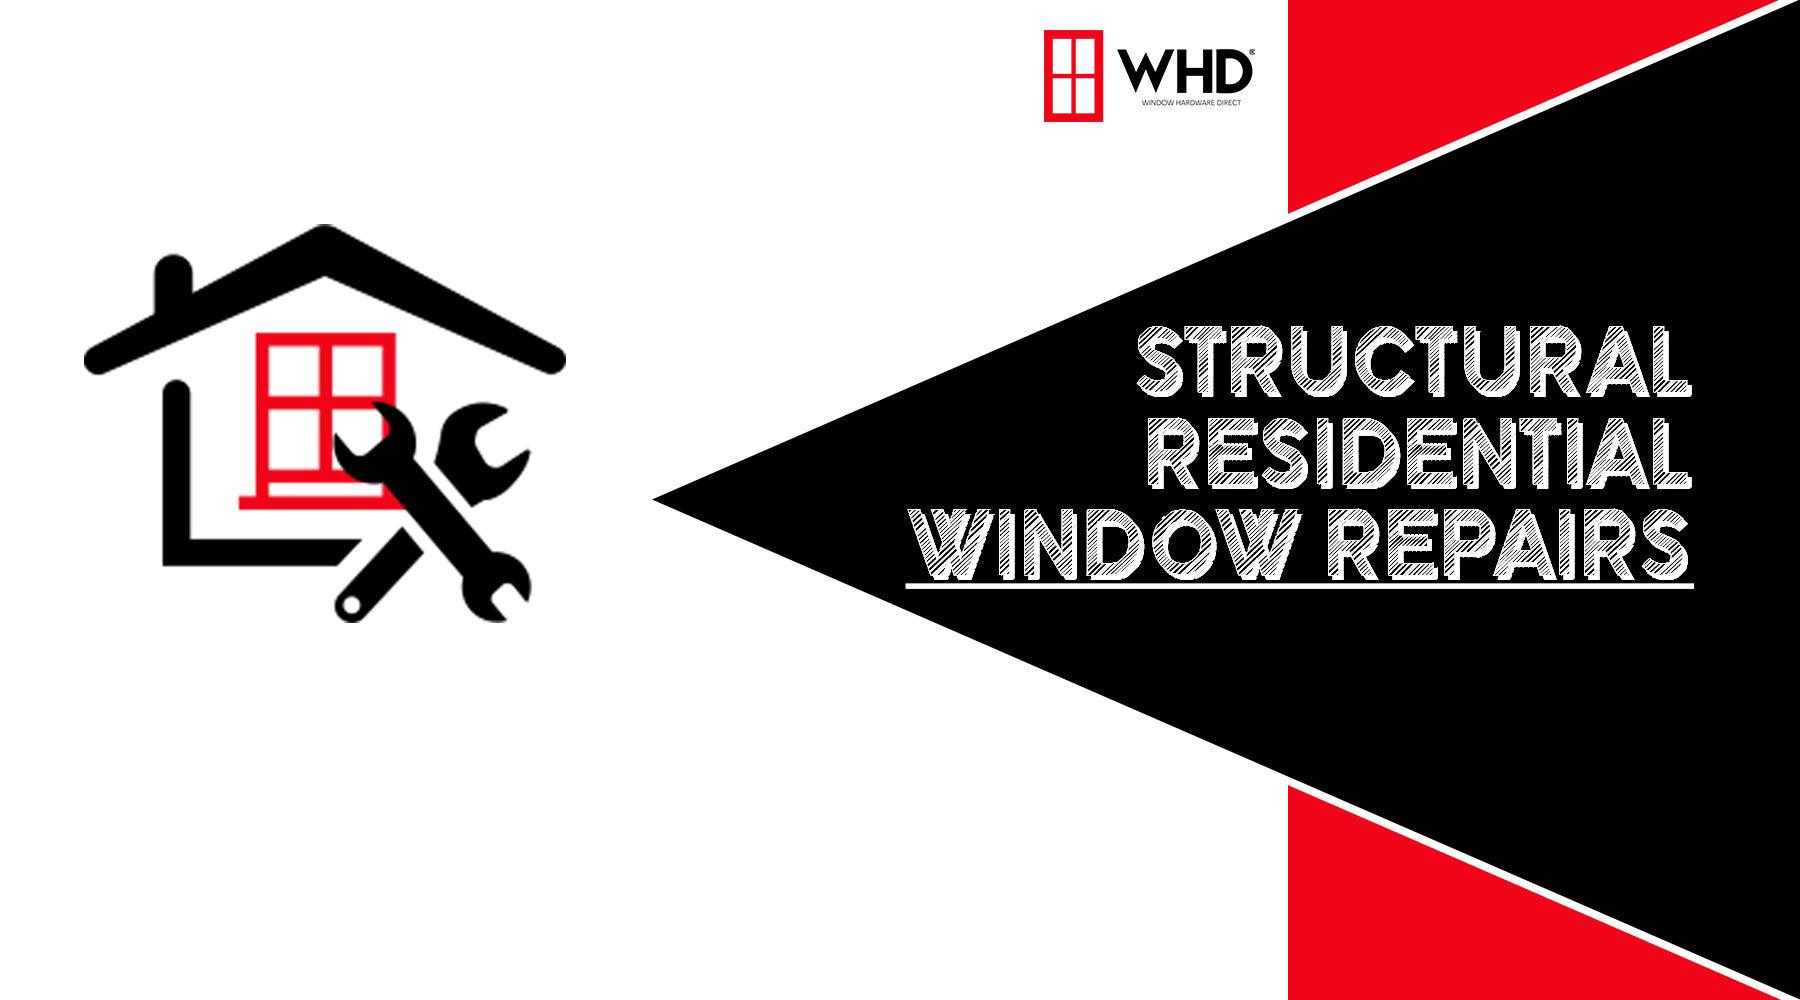 Exploring Structural Window Repairs for Residential Properties